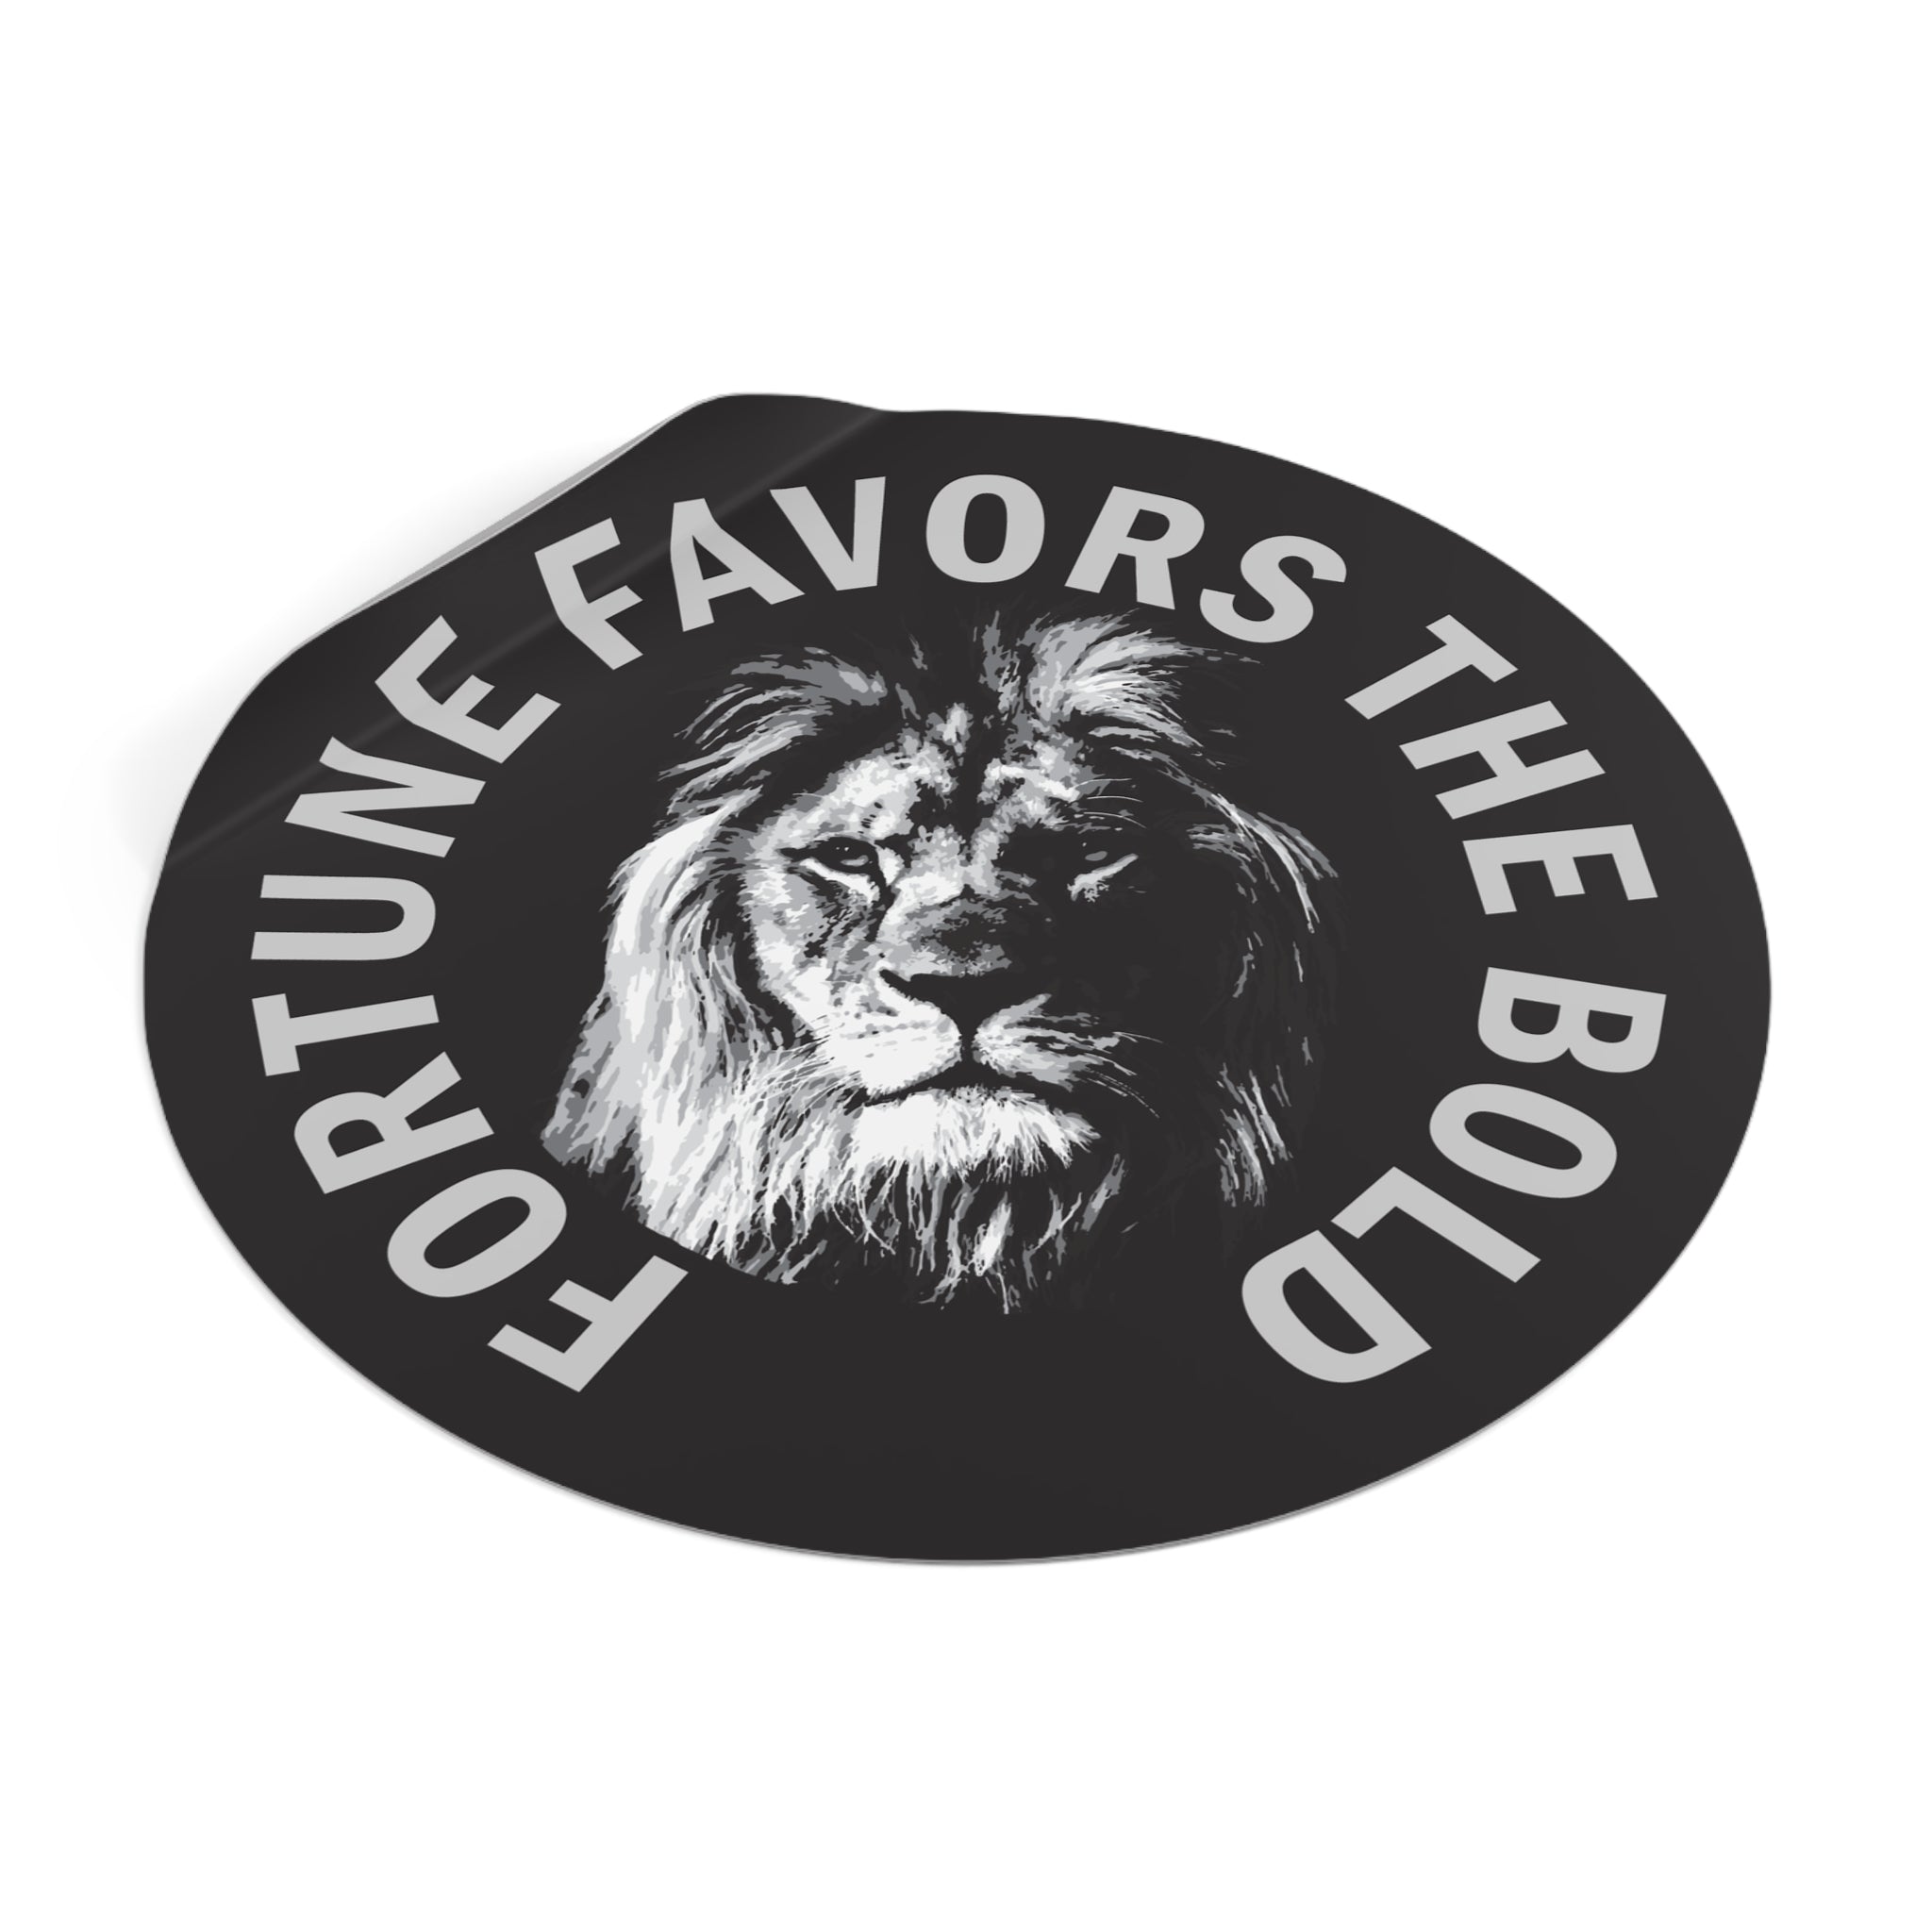 Fortune favors the bold sticker-Boldness vinyl sticker #size_4x4-inches